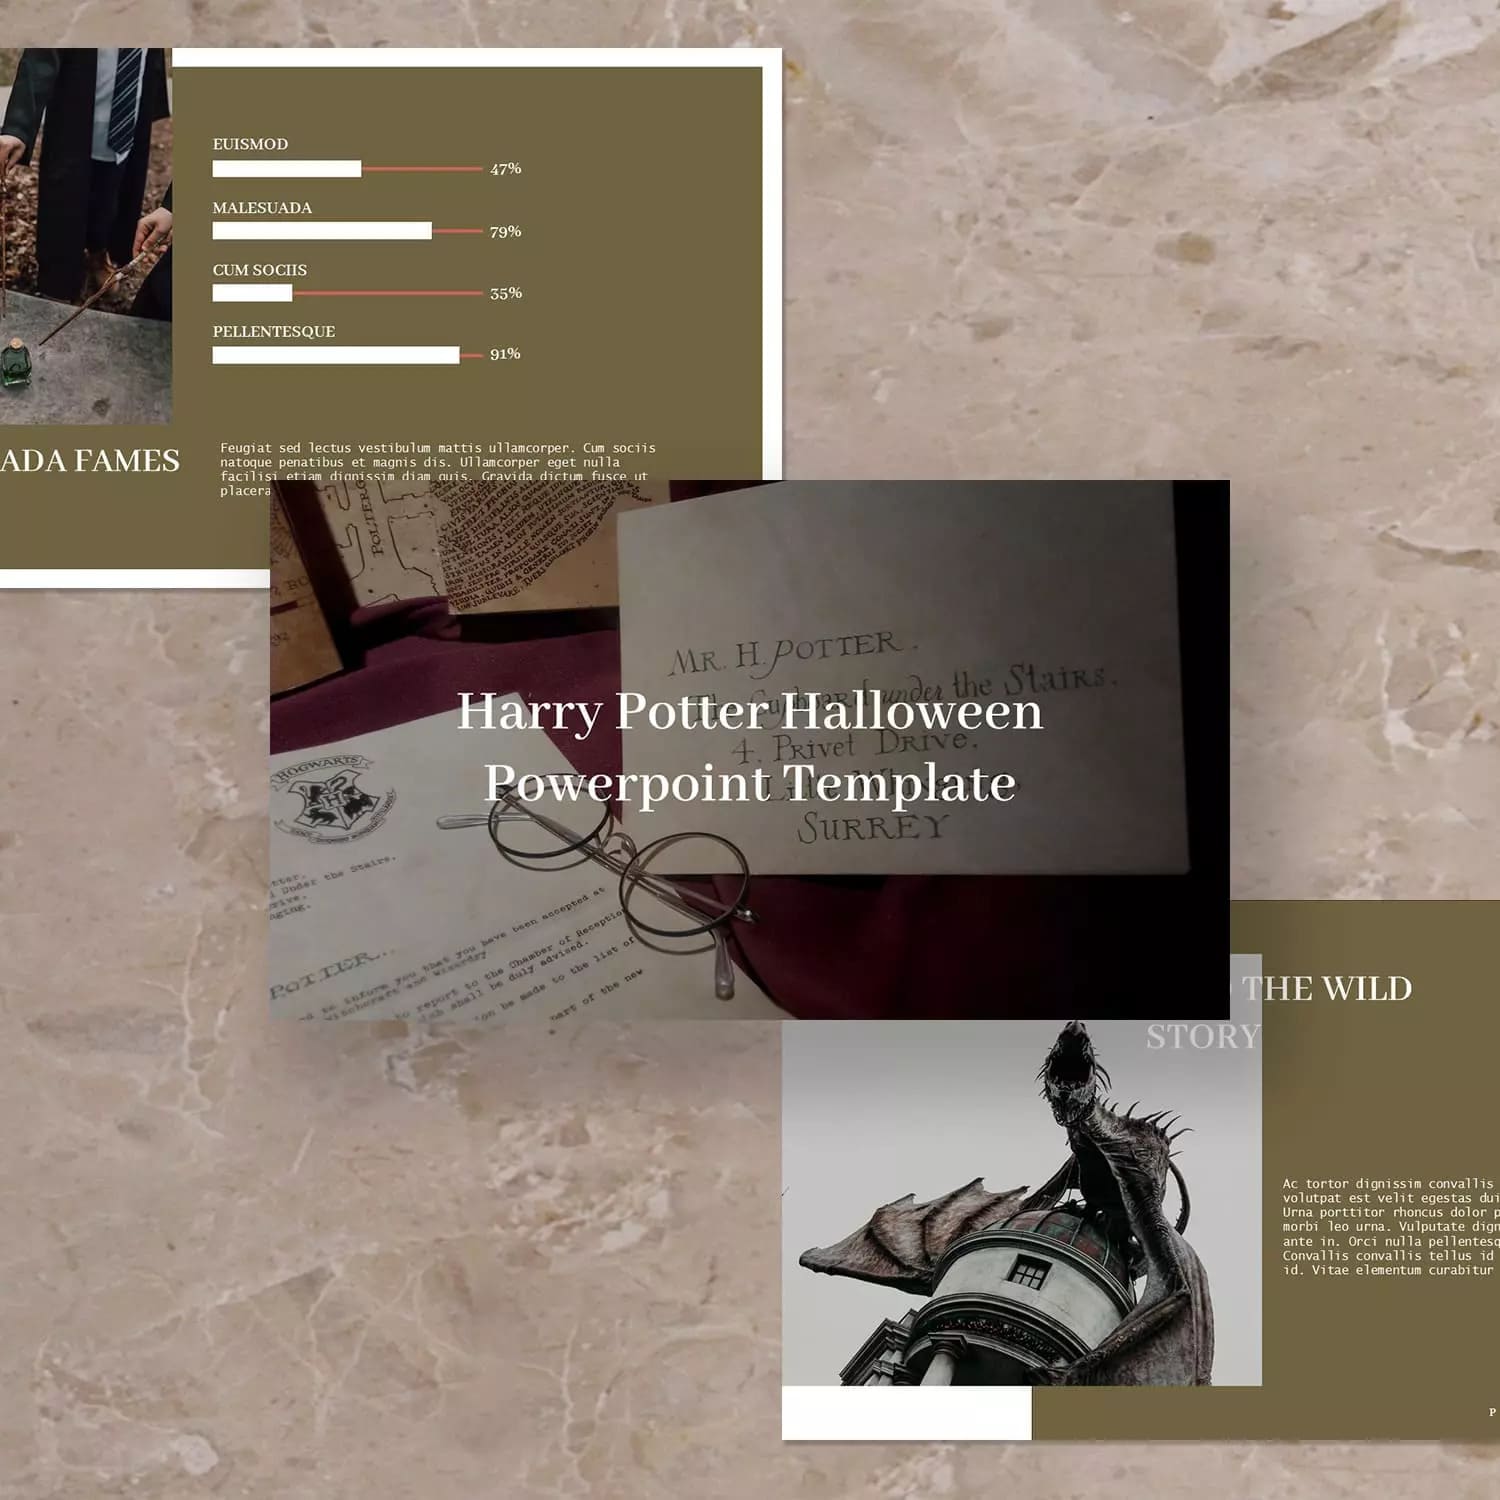 Harry Potter Halloween Powerpoint Template preview image.